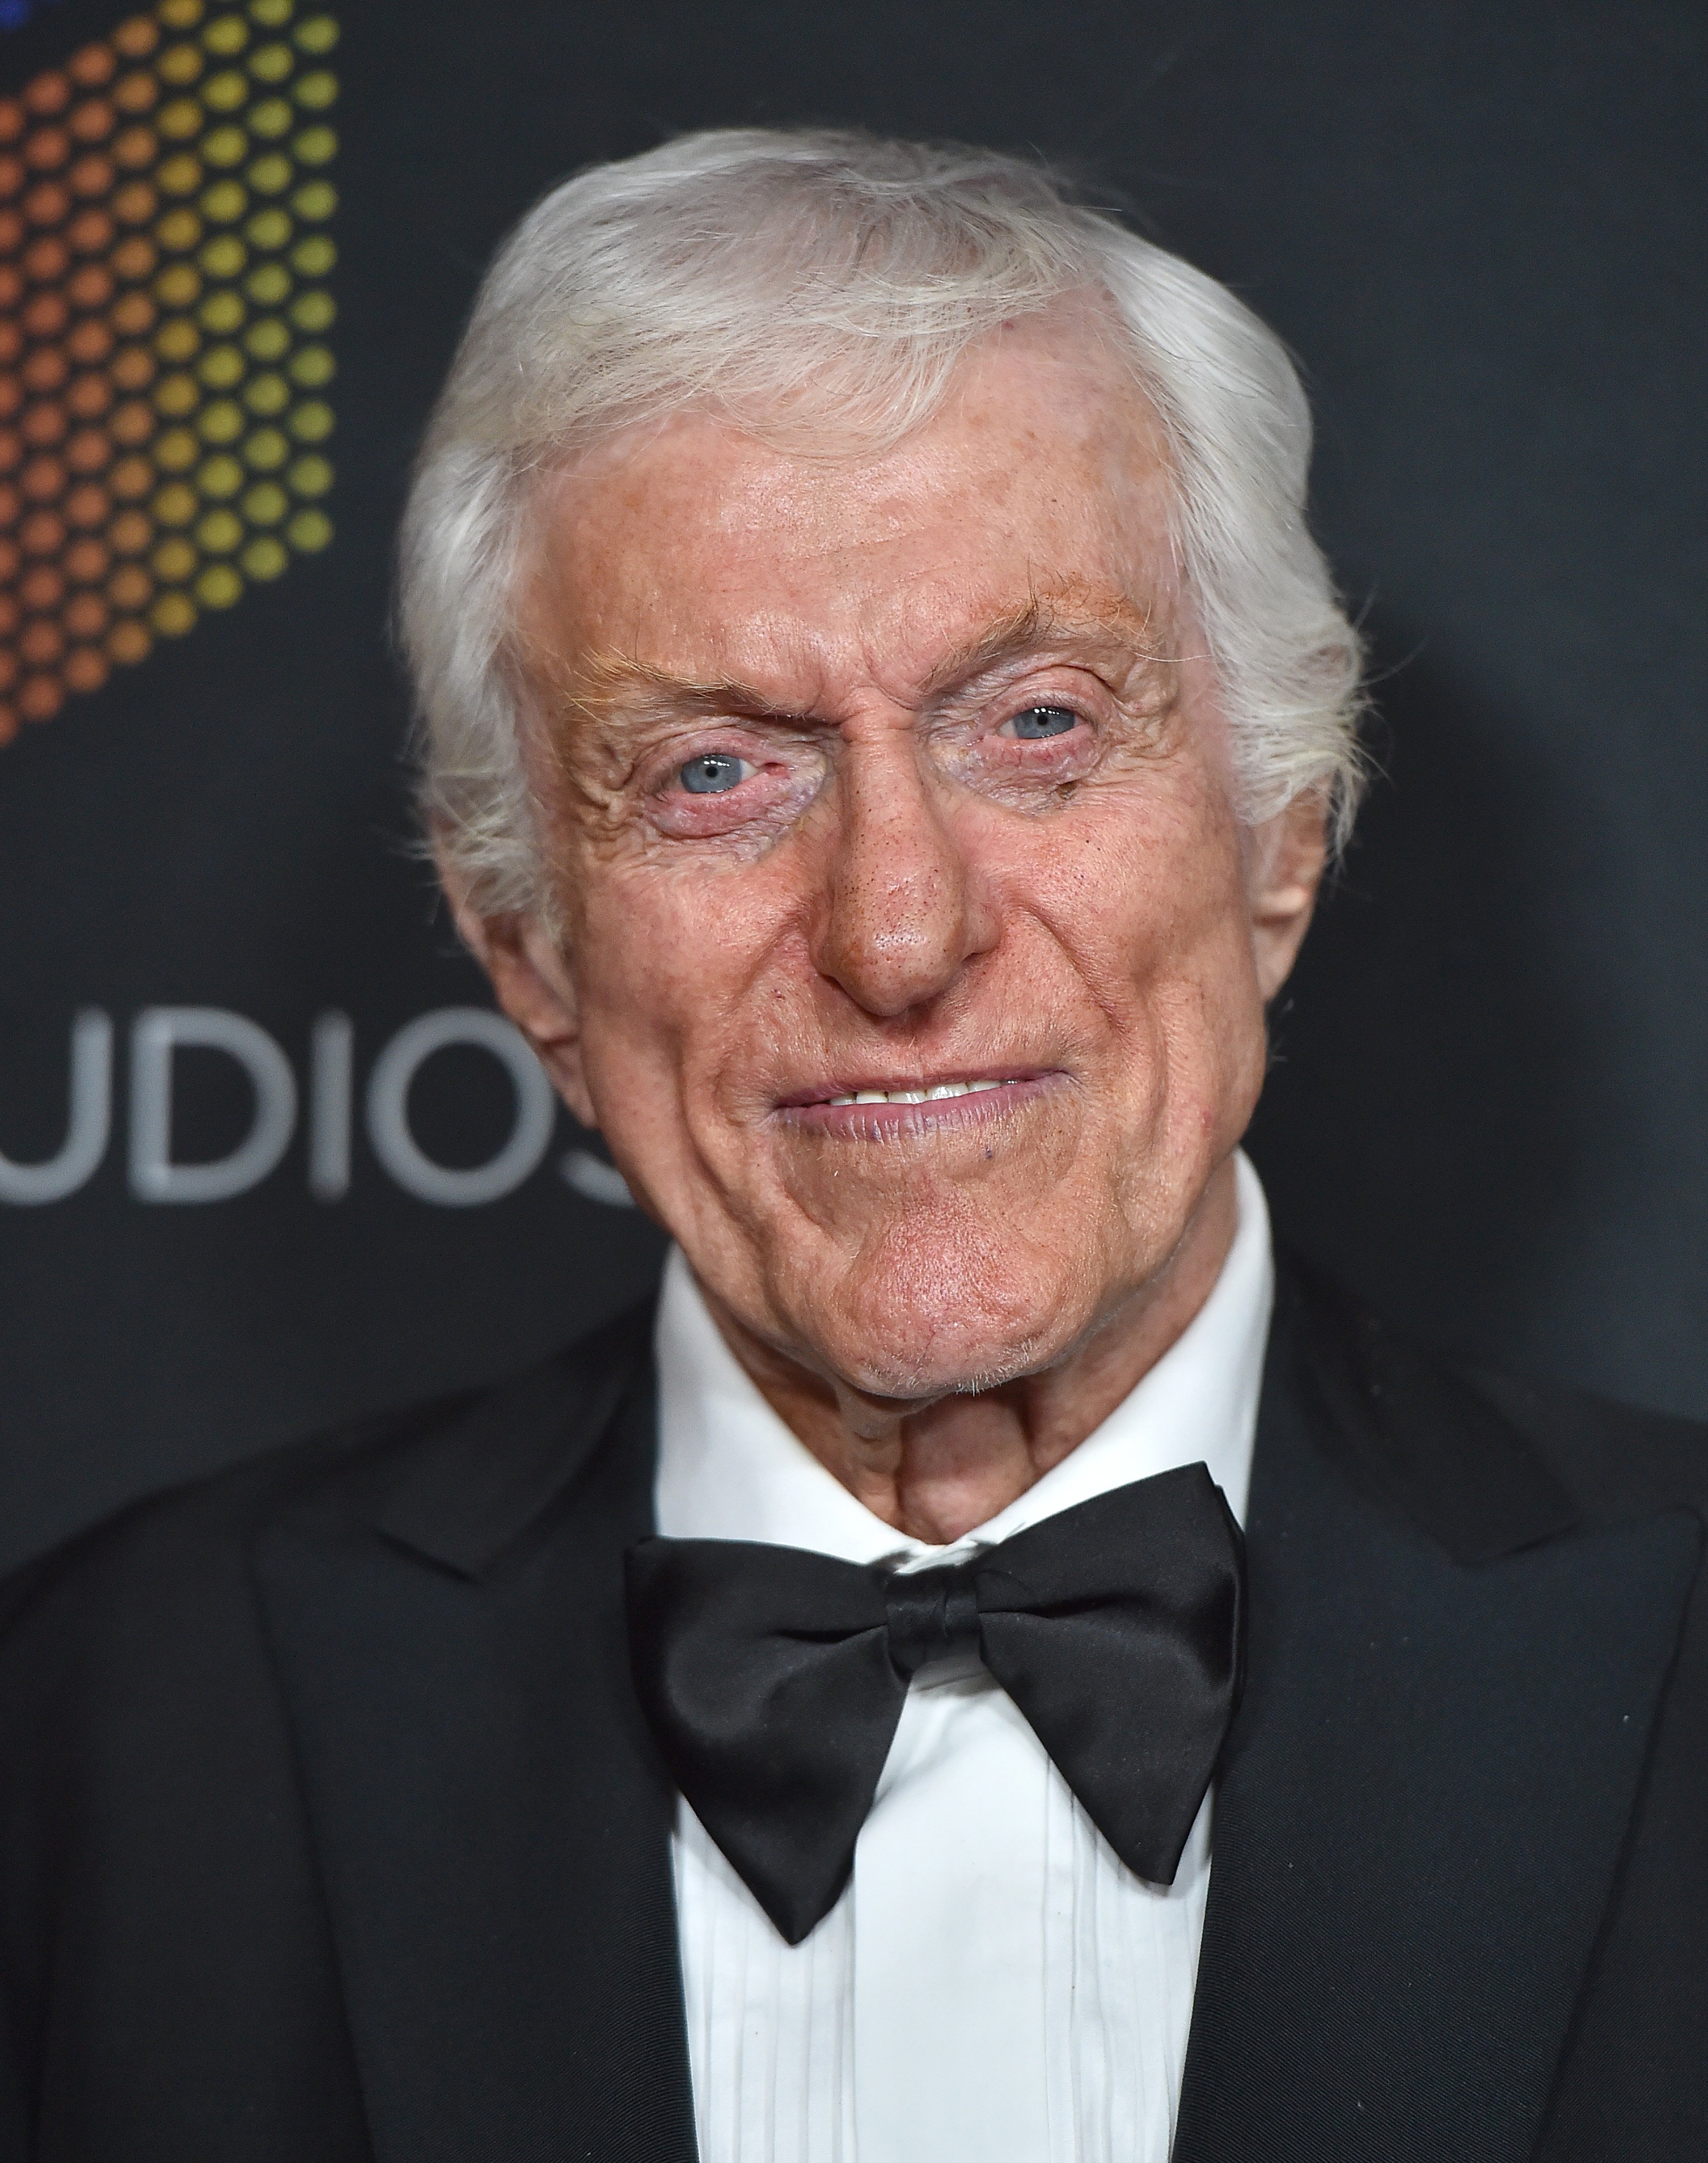 Dick Van Dyke arrives at the 2017 AMD British Academy Britannia Awards at The Beverly Hilton Hotel on October 27, 2017, in Beverly Hills, California. | Source: Getty Images